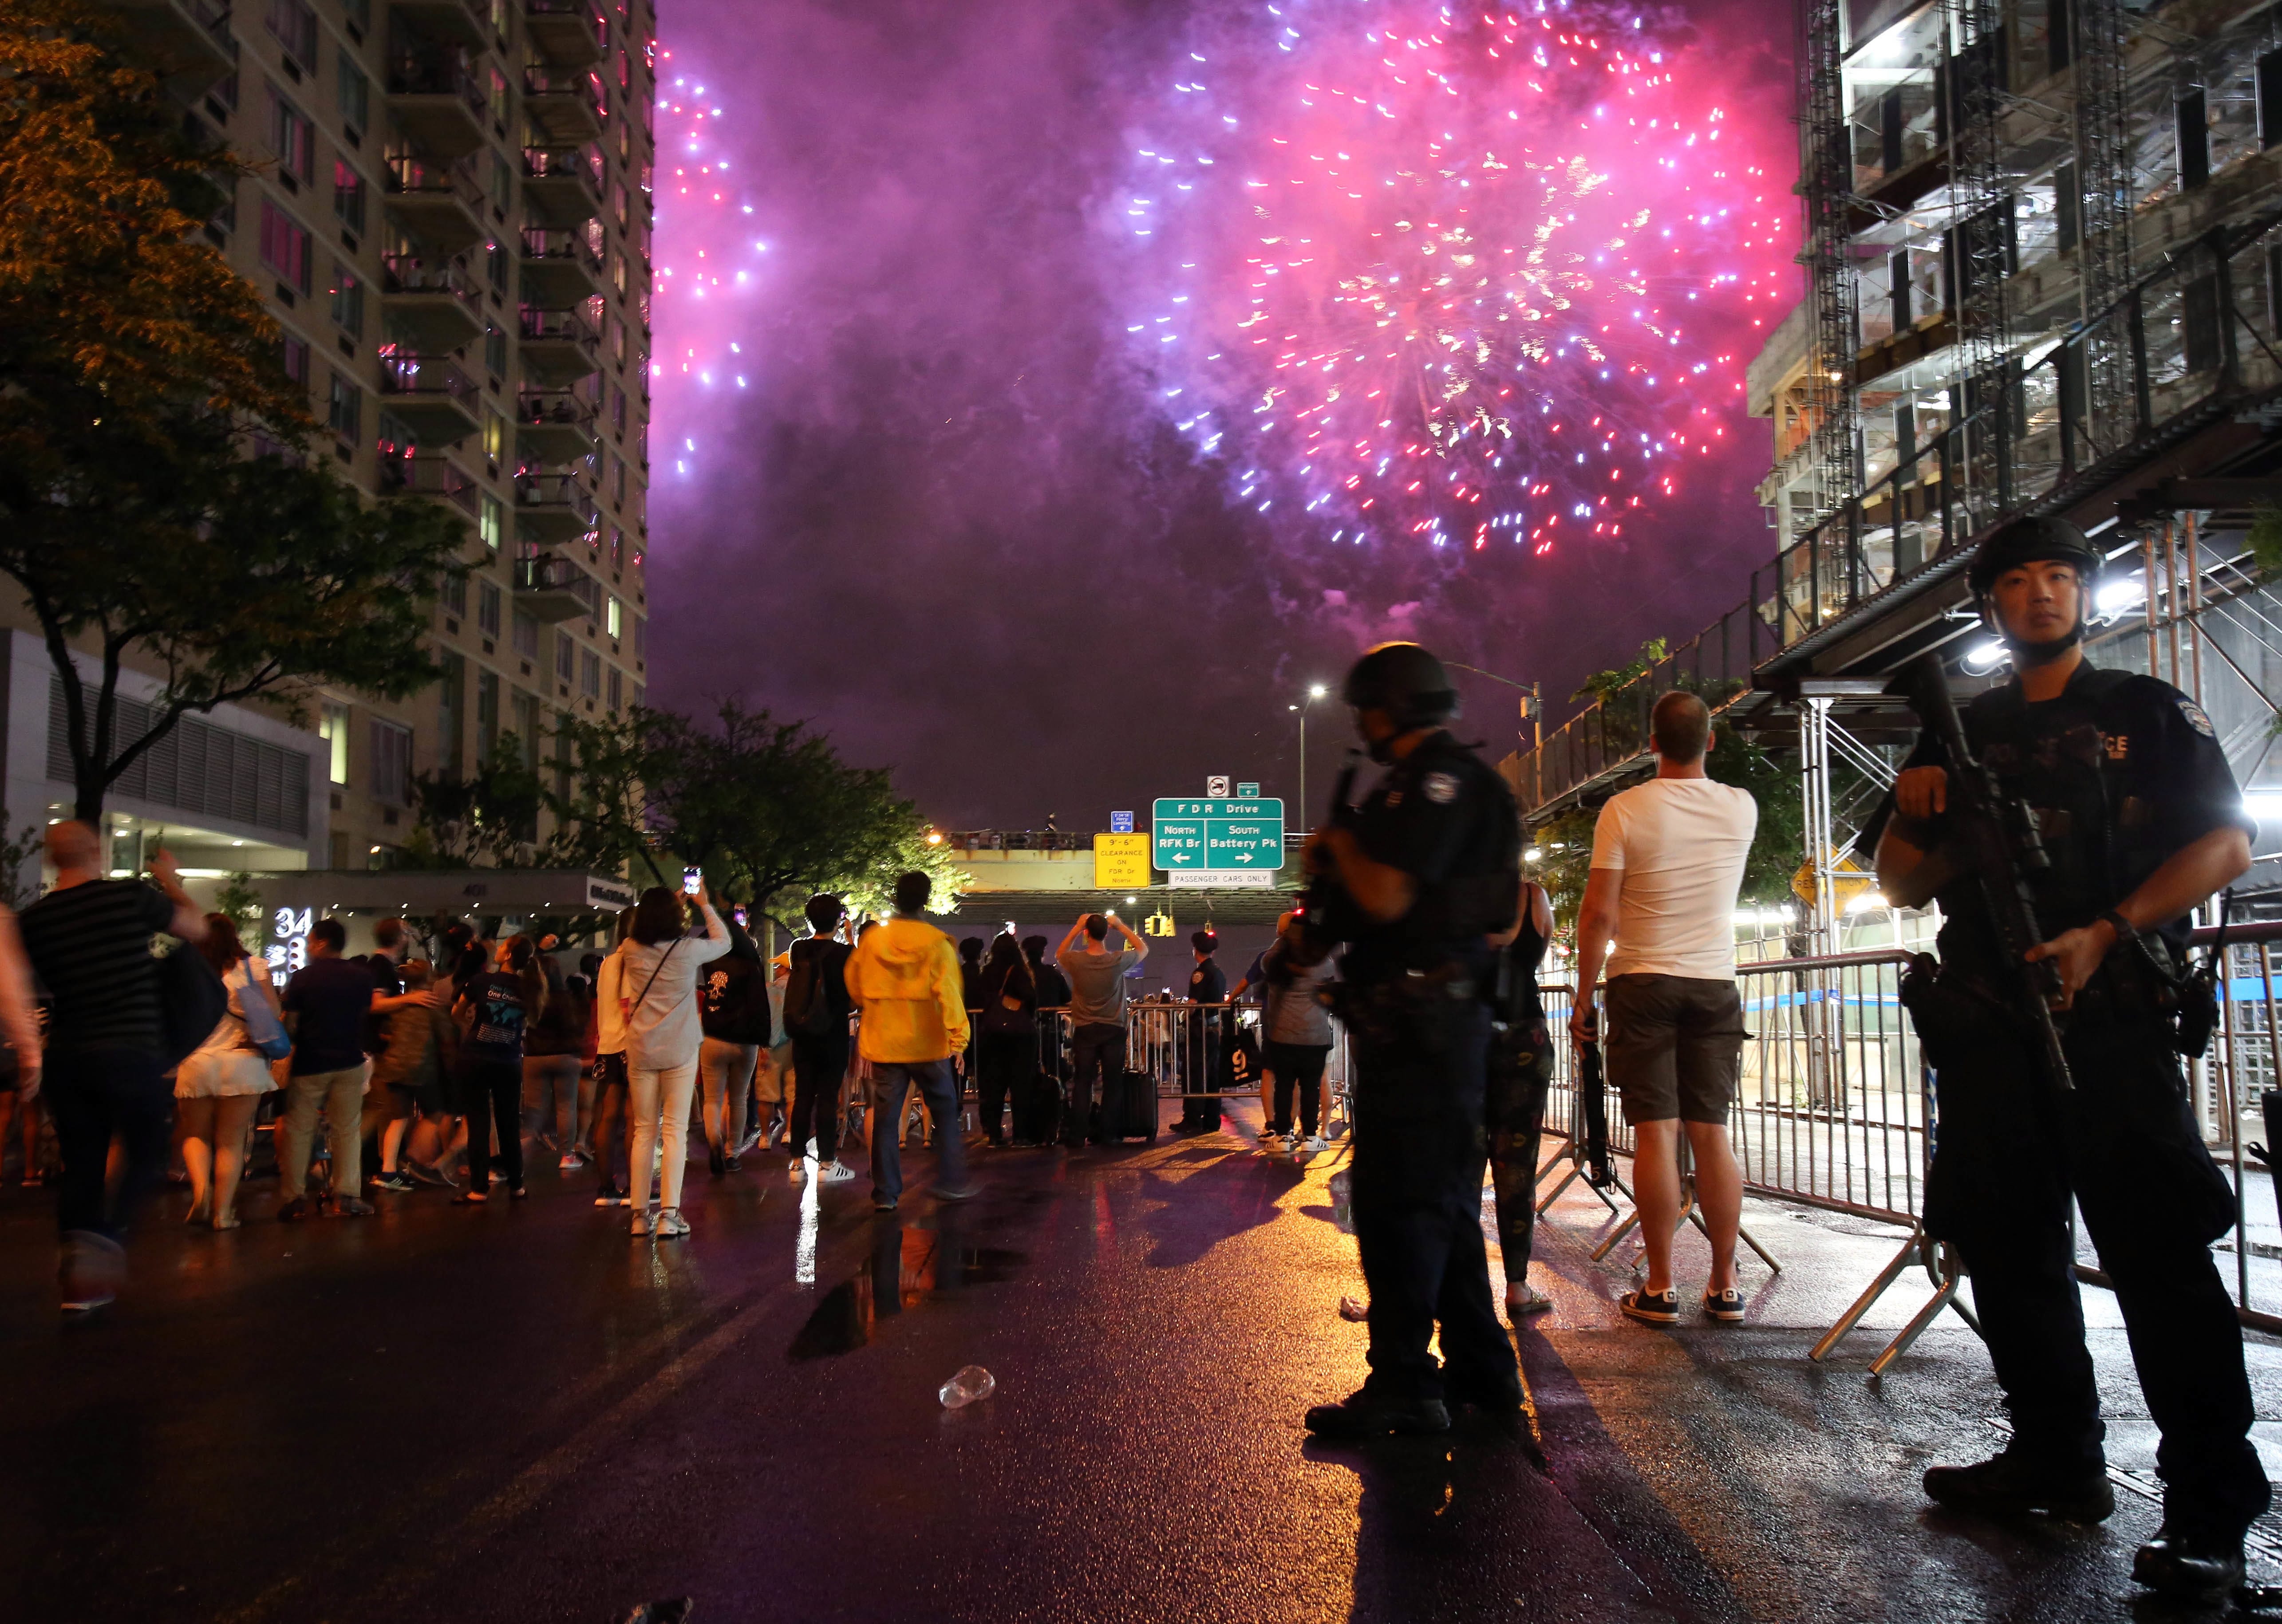 New York City counterterrorism police officers watch over spectators watching the Fourth of July fireworks, Monday, July 4, 2016, along the East River on the FDR Drive in New York.